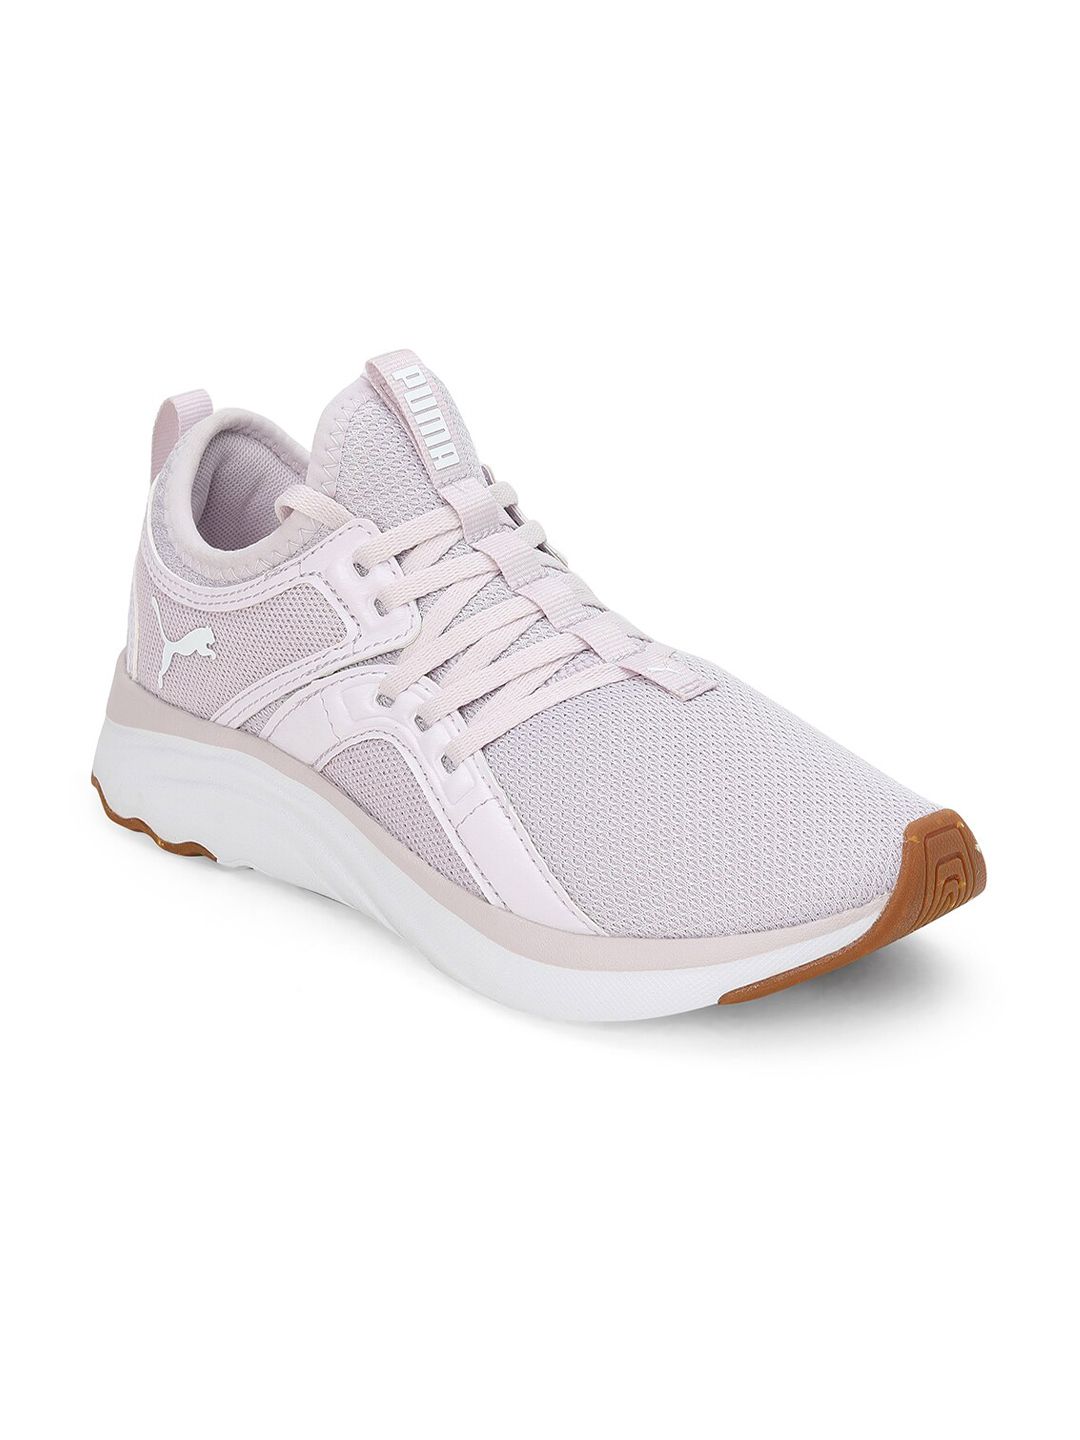 Puma Women Purple Softride Sophia Better Textile Running Shoes Price in India